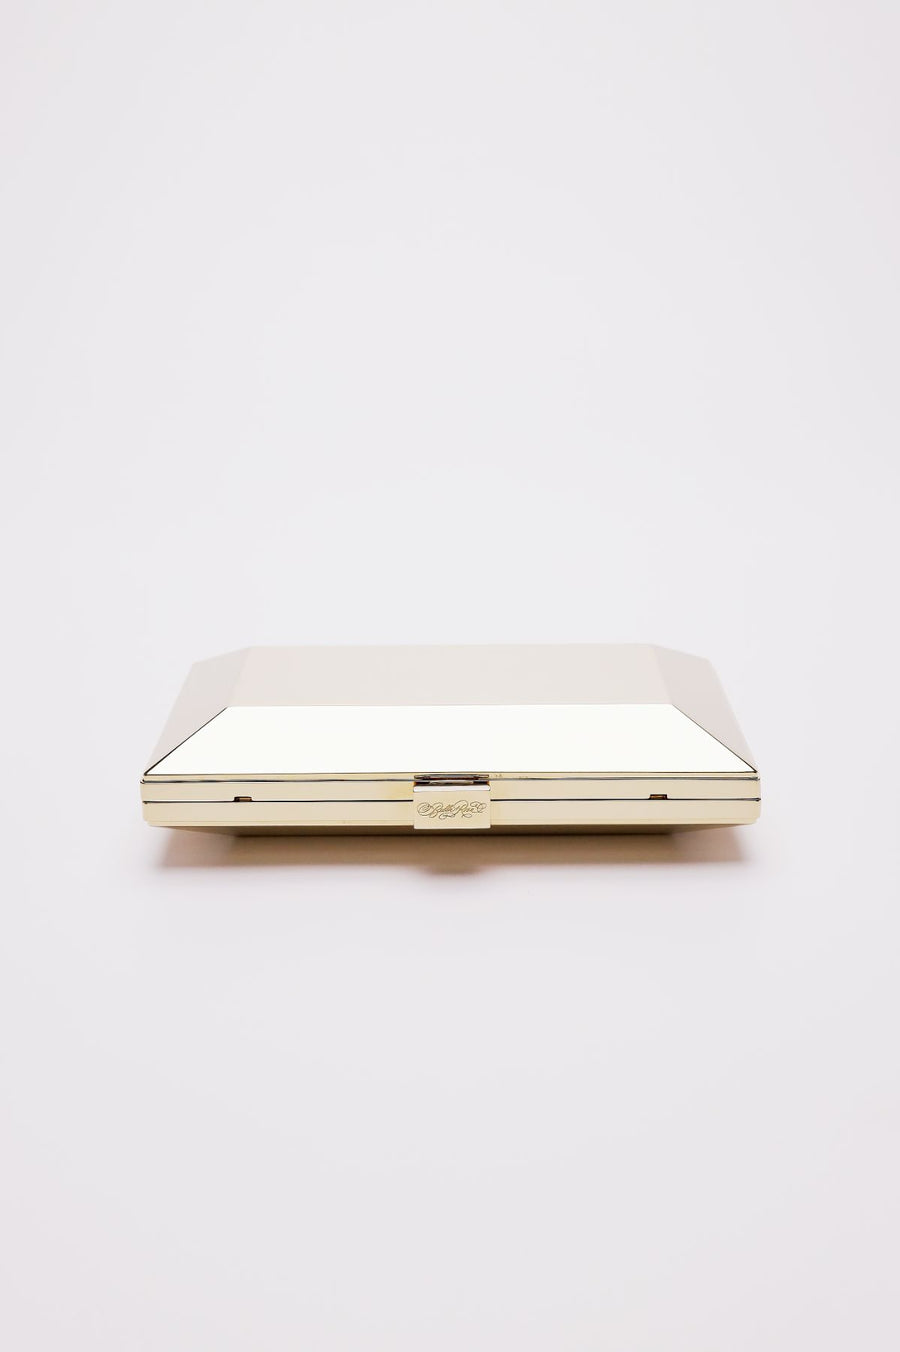 Top closed view of Milan geometric clutch in gold.